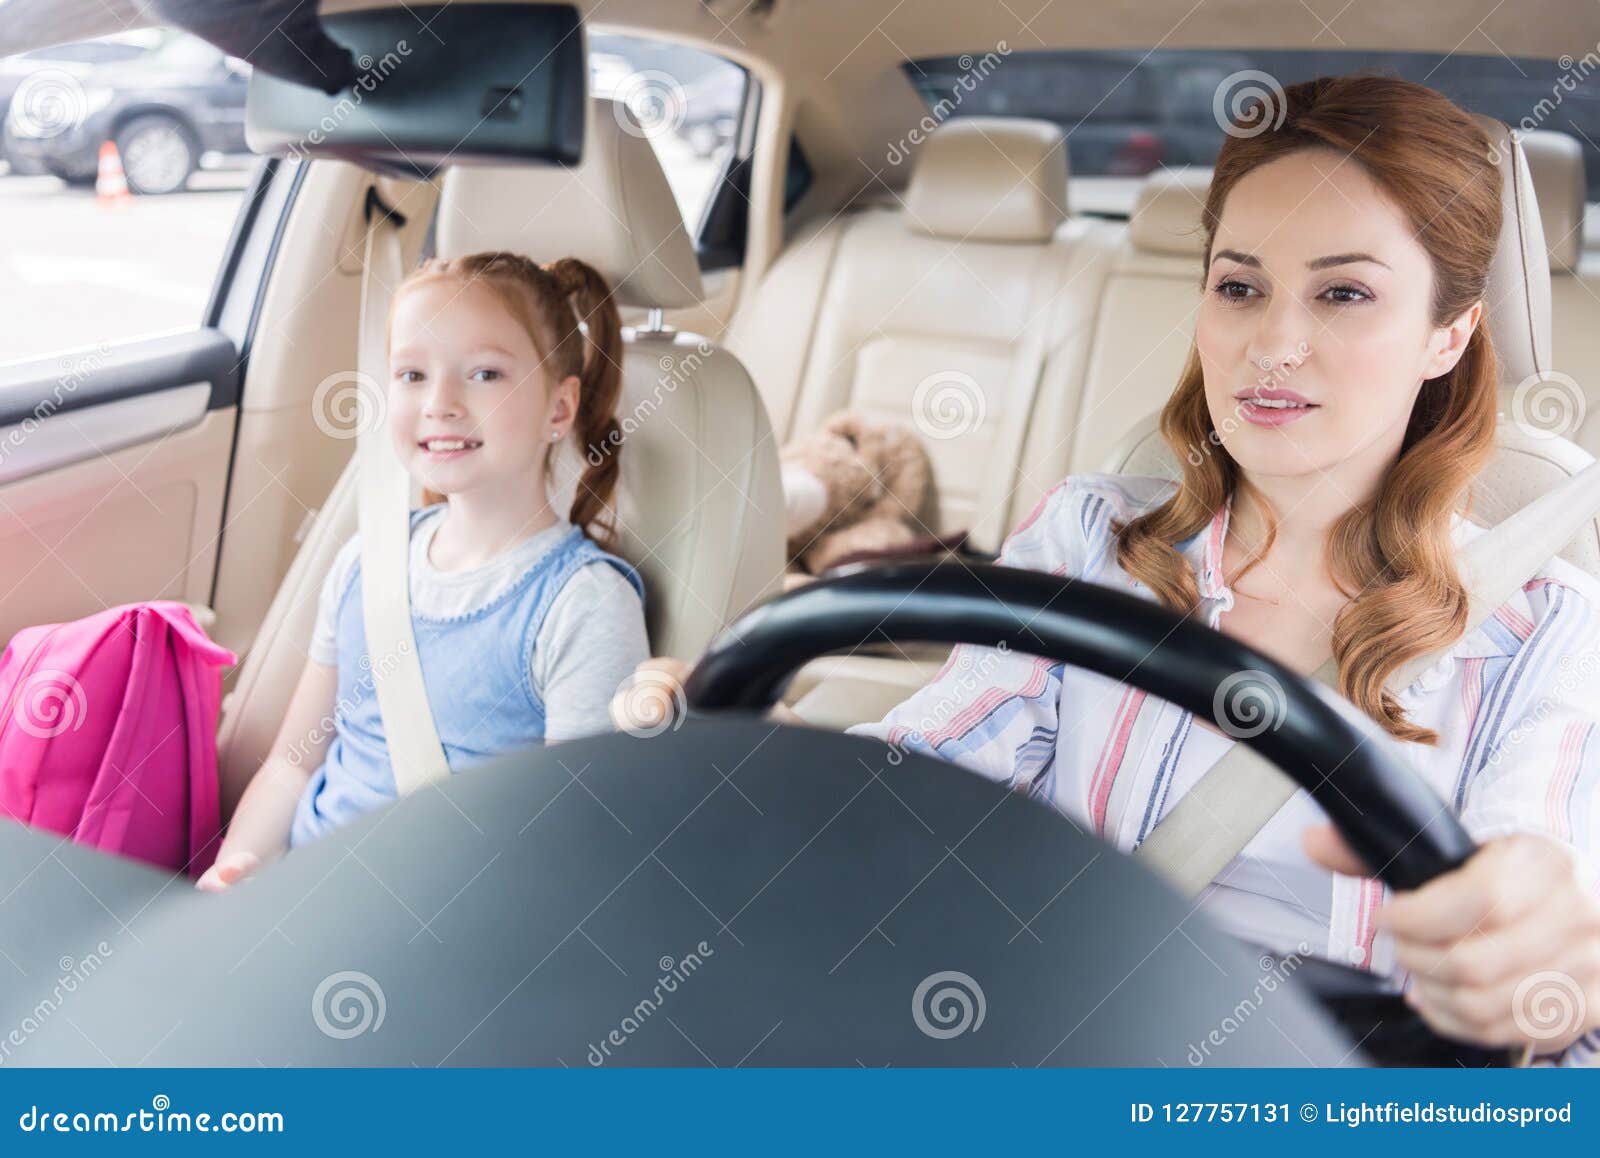 Portrait Of Woman Driving Car With Smiling Daughter Stock Image Image